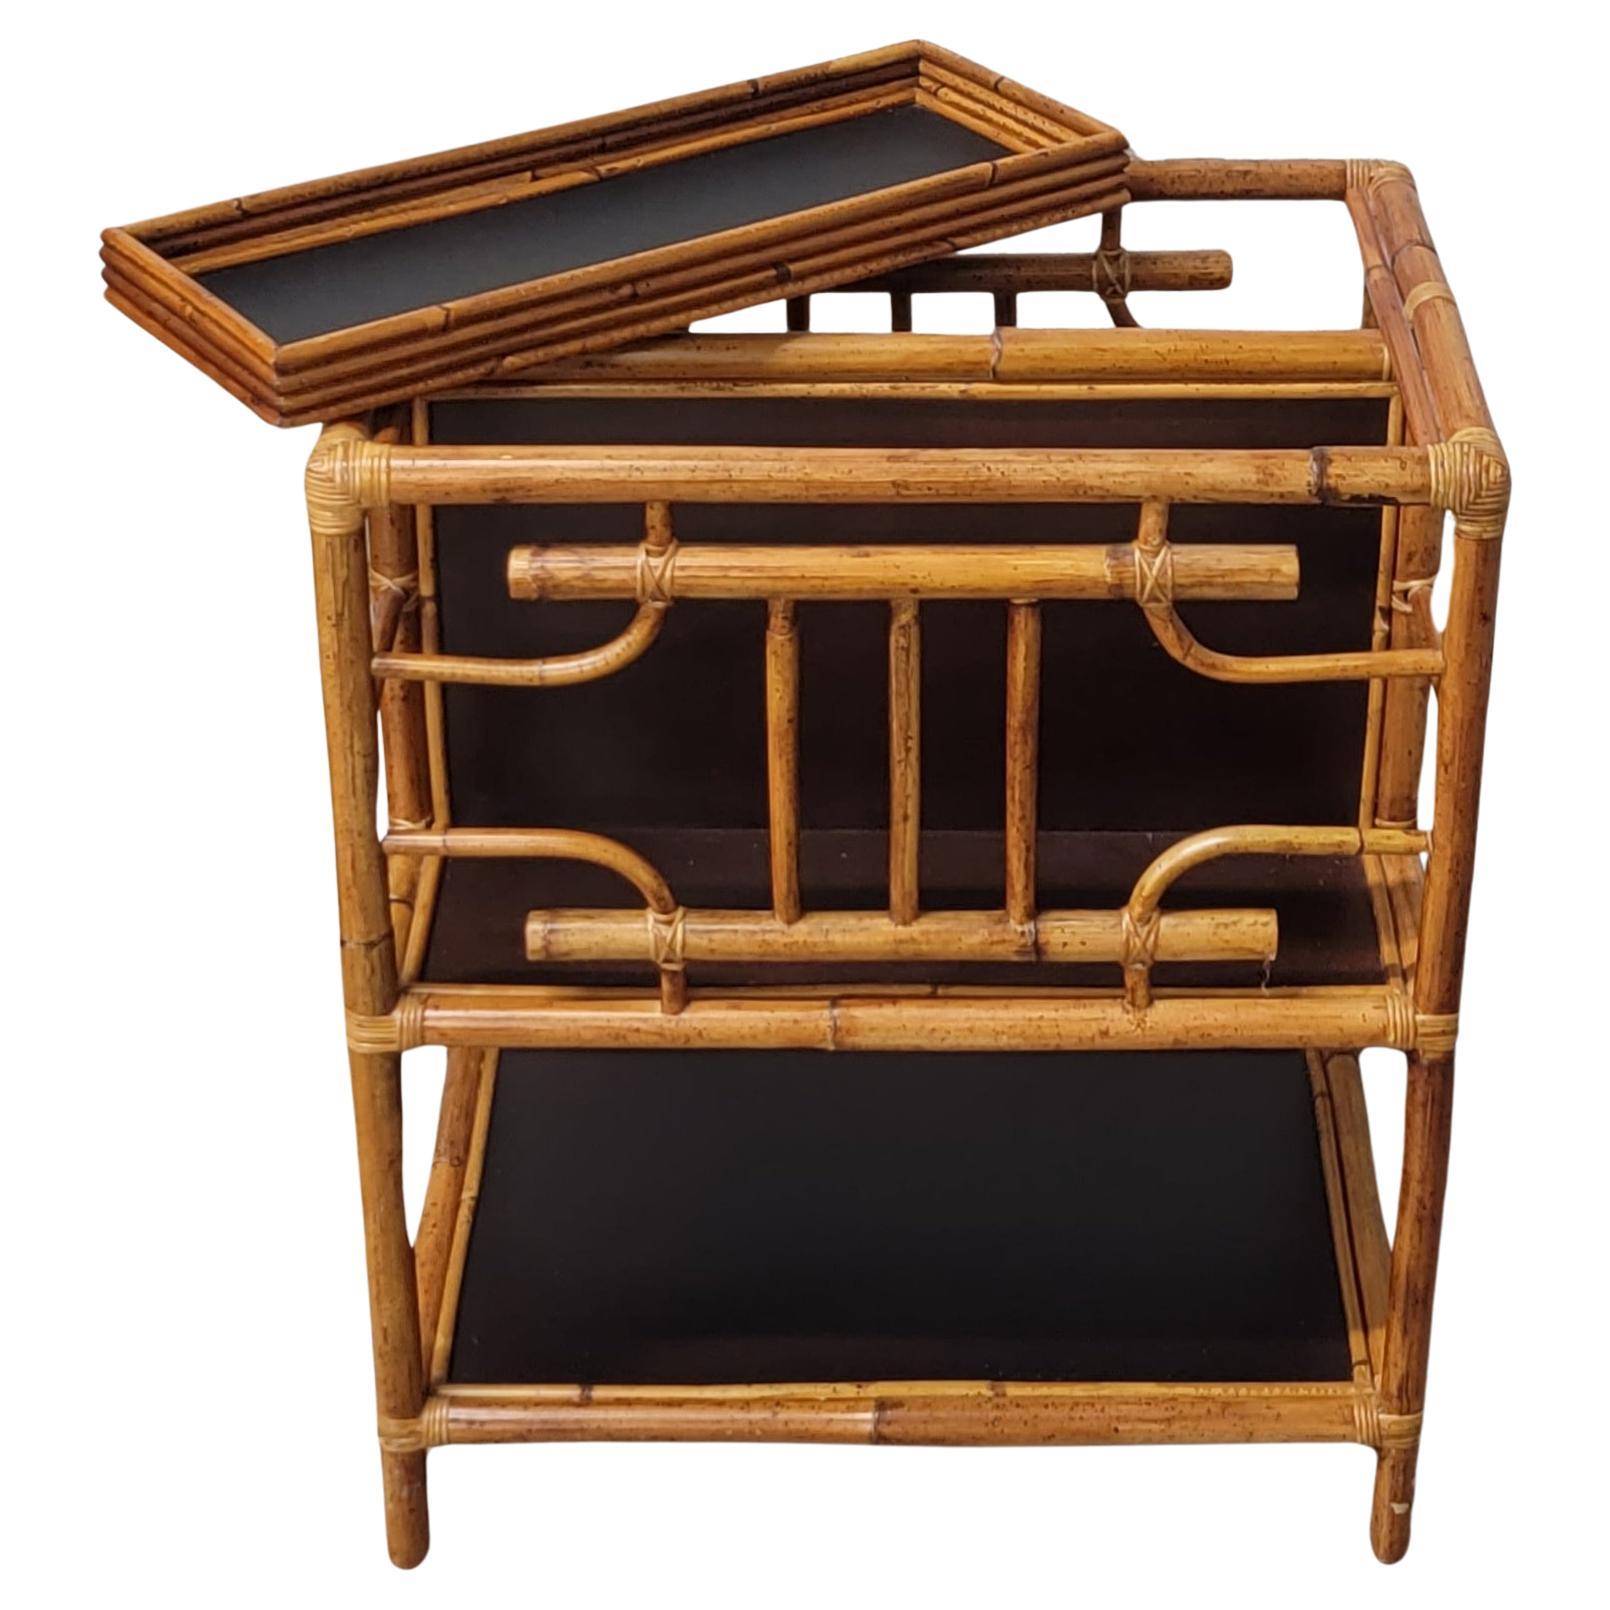 Vintage two-tier rattan stationary bar cart with removable pencil reed serving tray and fretwork. The Hollywood Regency style cart features an ebonized raffia divider and lower shelf. A versatile piece that can also be used as a magazine rack or to